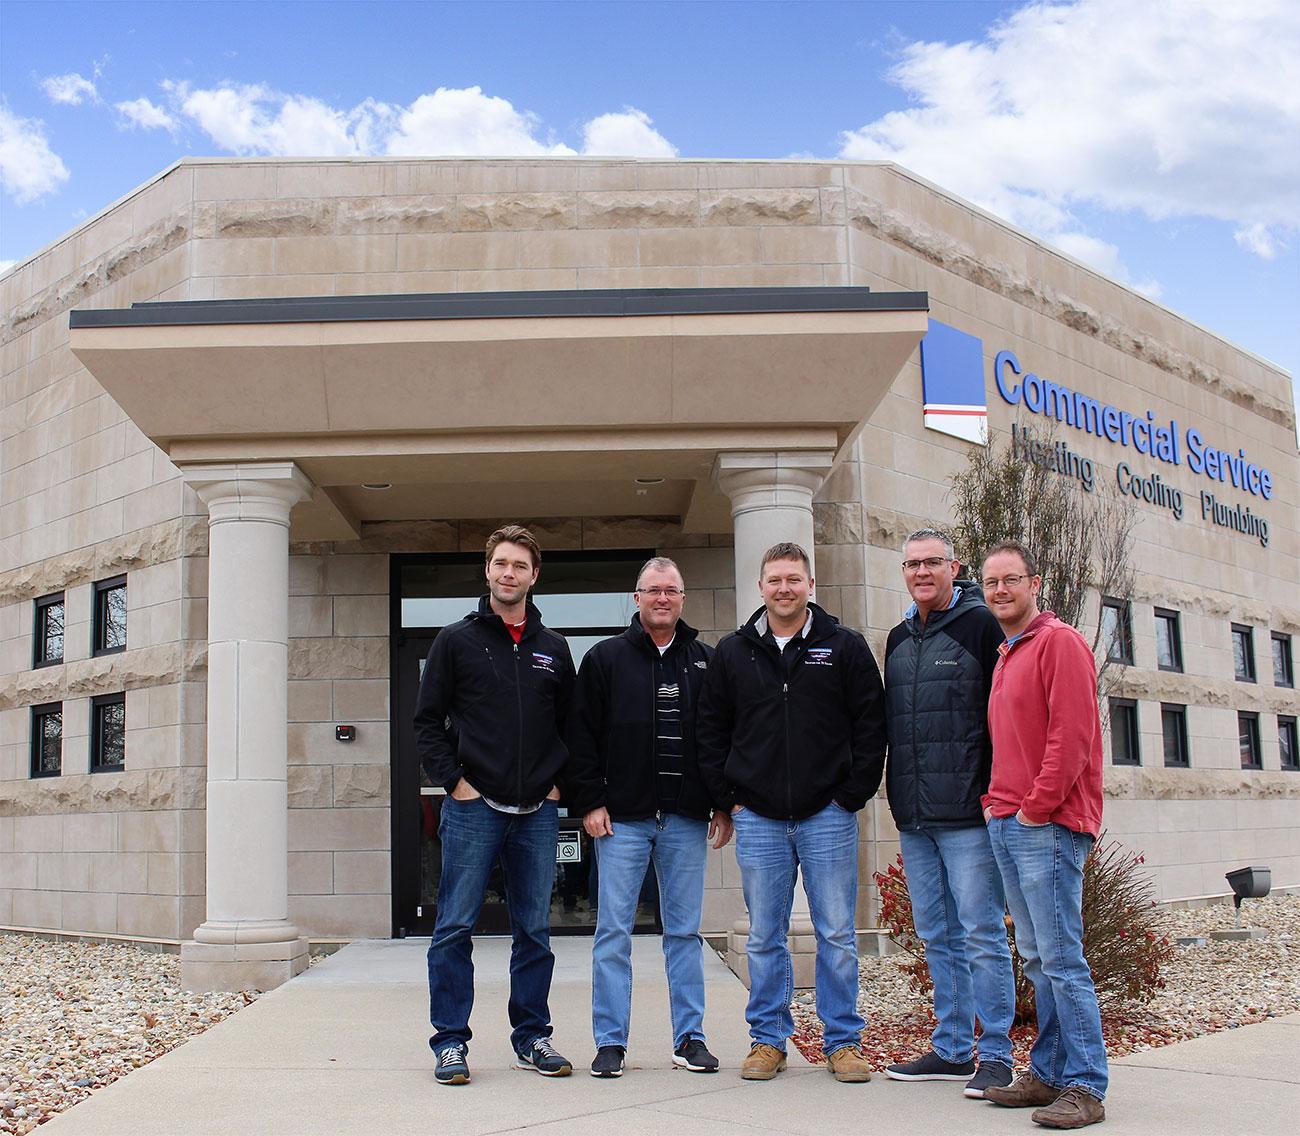 commercial service team standing in front of building